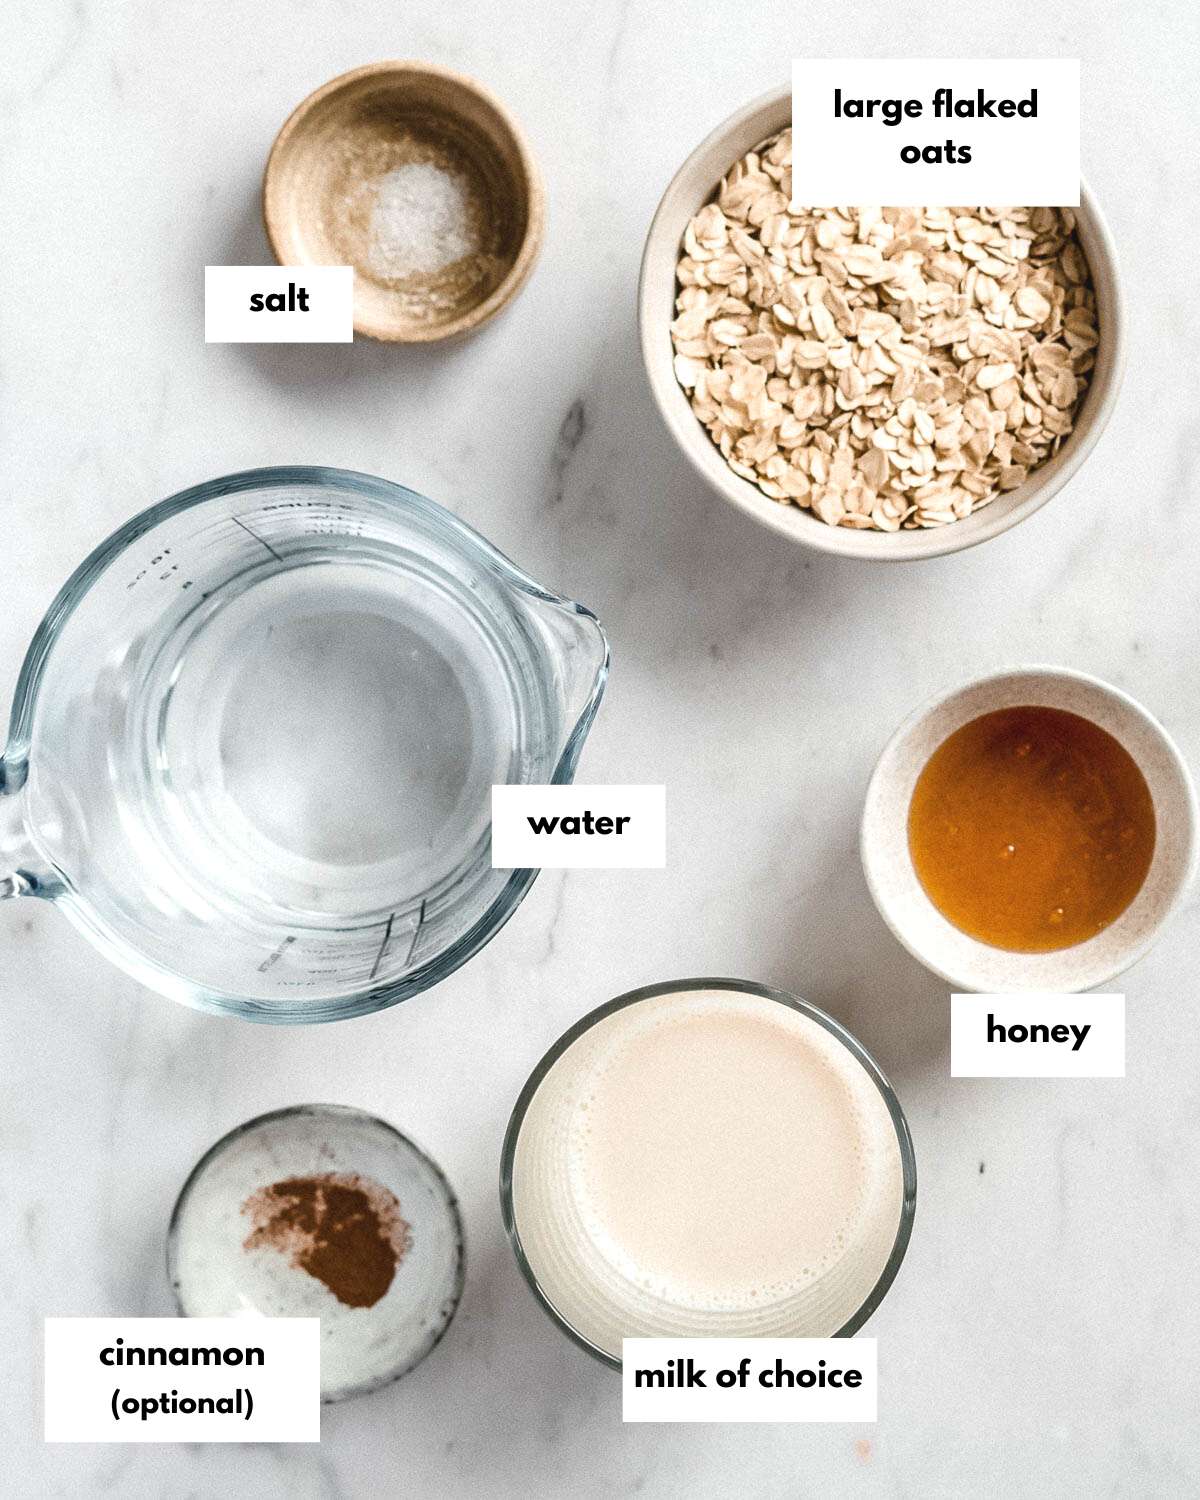 all ingredients needed to make honey oatmeal.